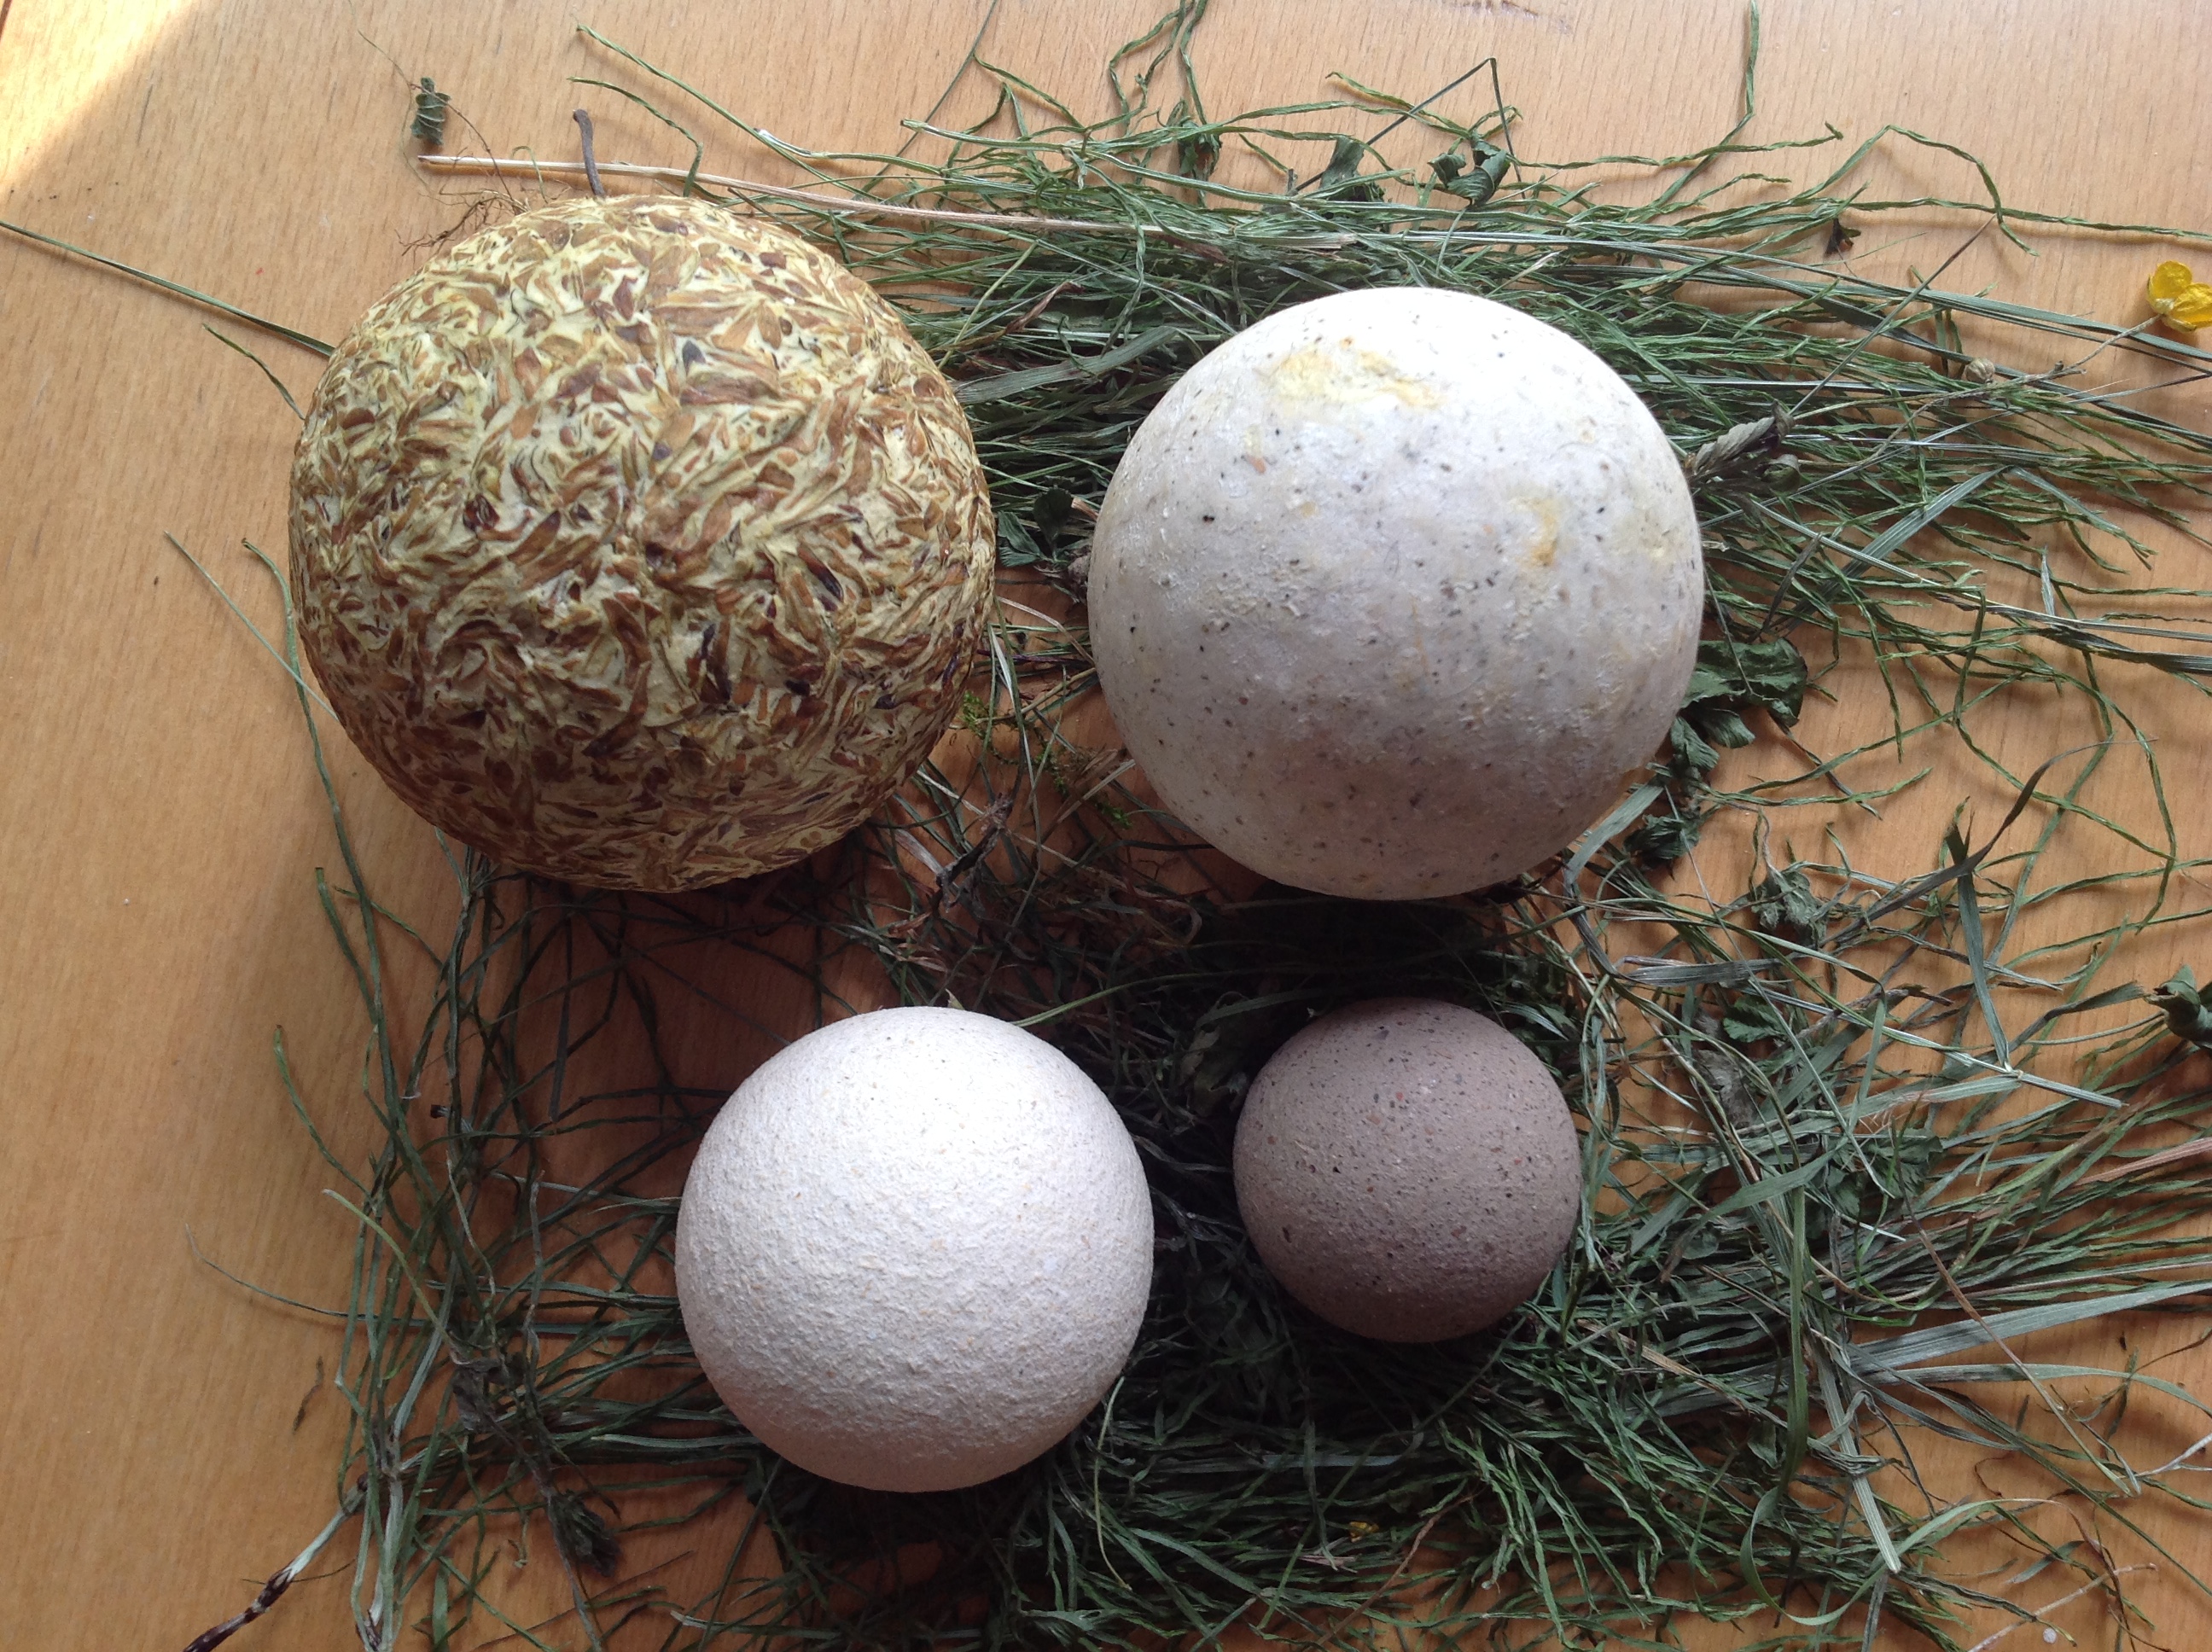 Ceramic globes of different sizes and colors, displayed on top of some dried grasses